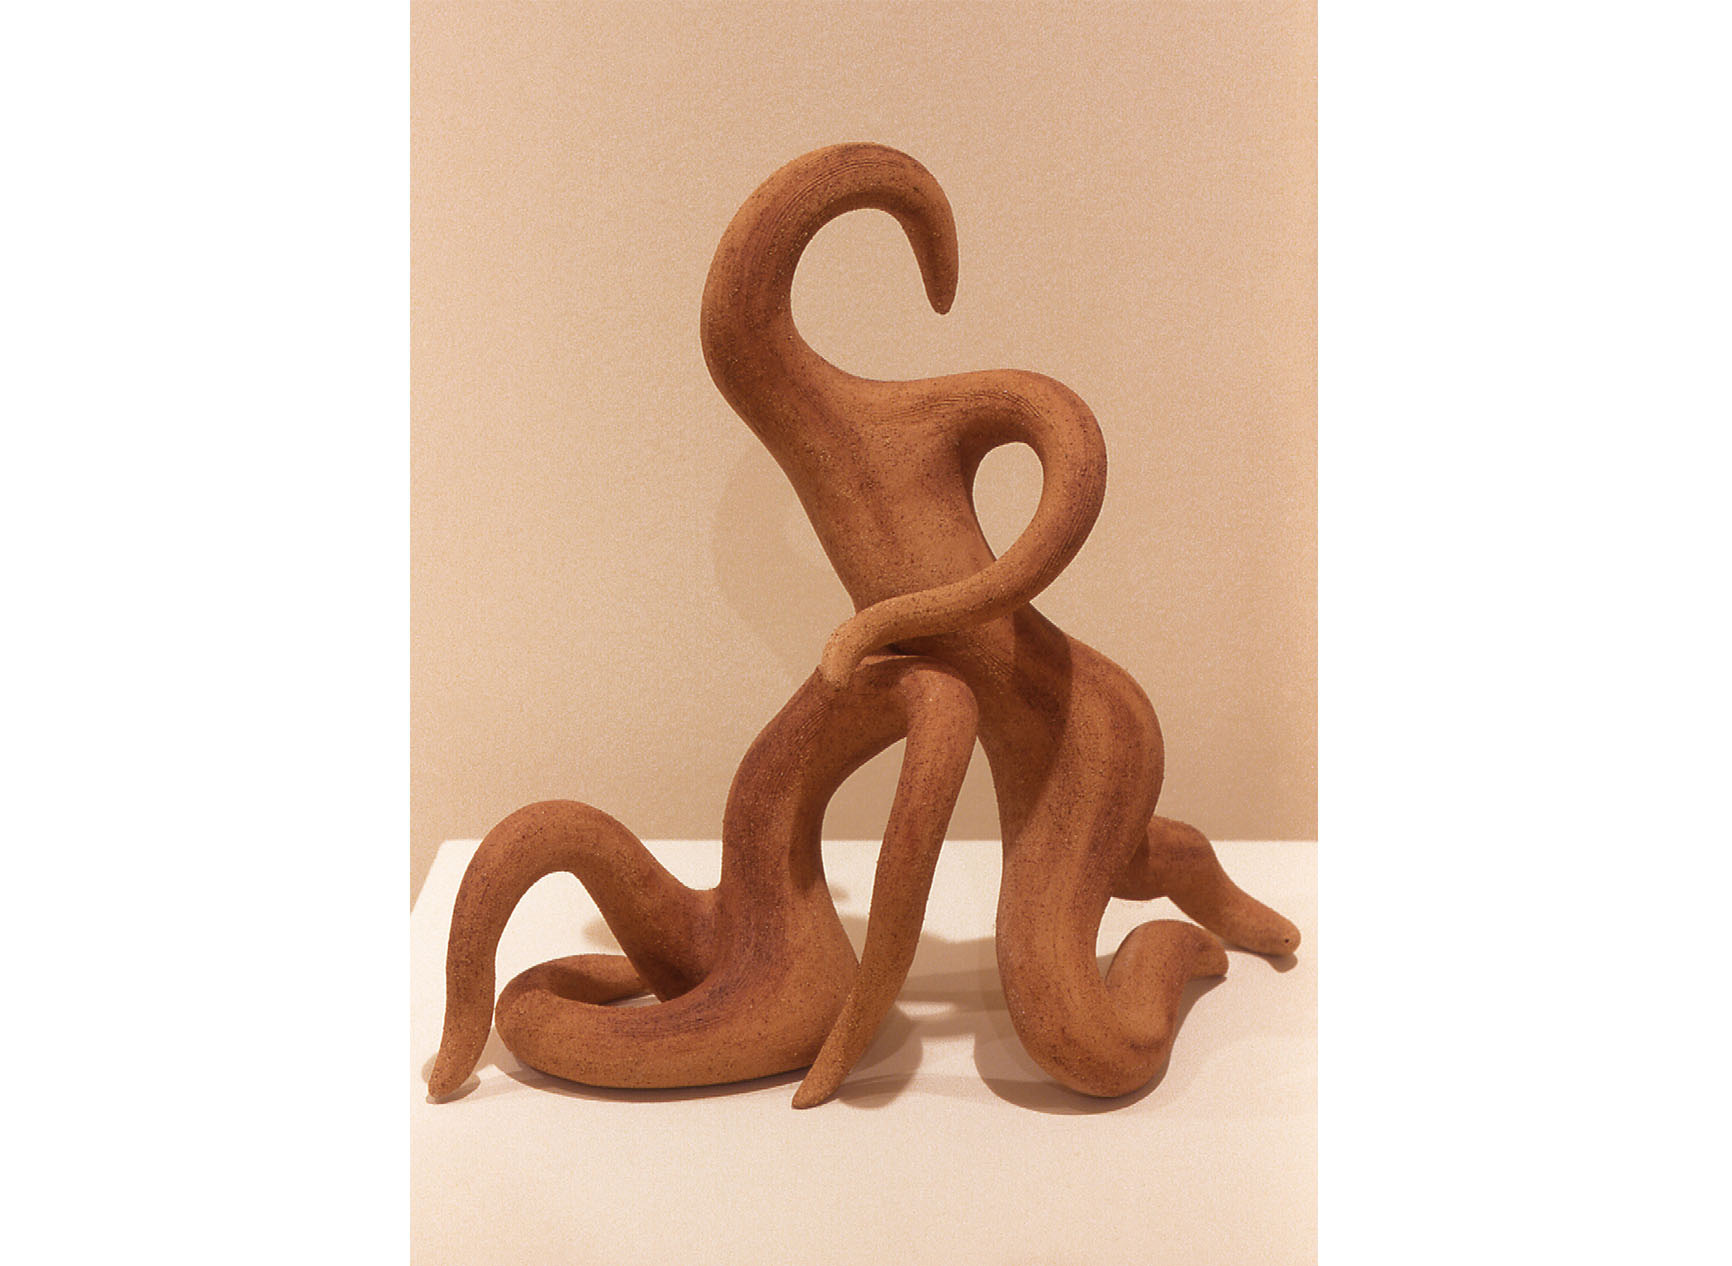 Two curvacious human like sculptures called The Model - finished in natural oxides